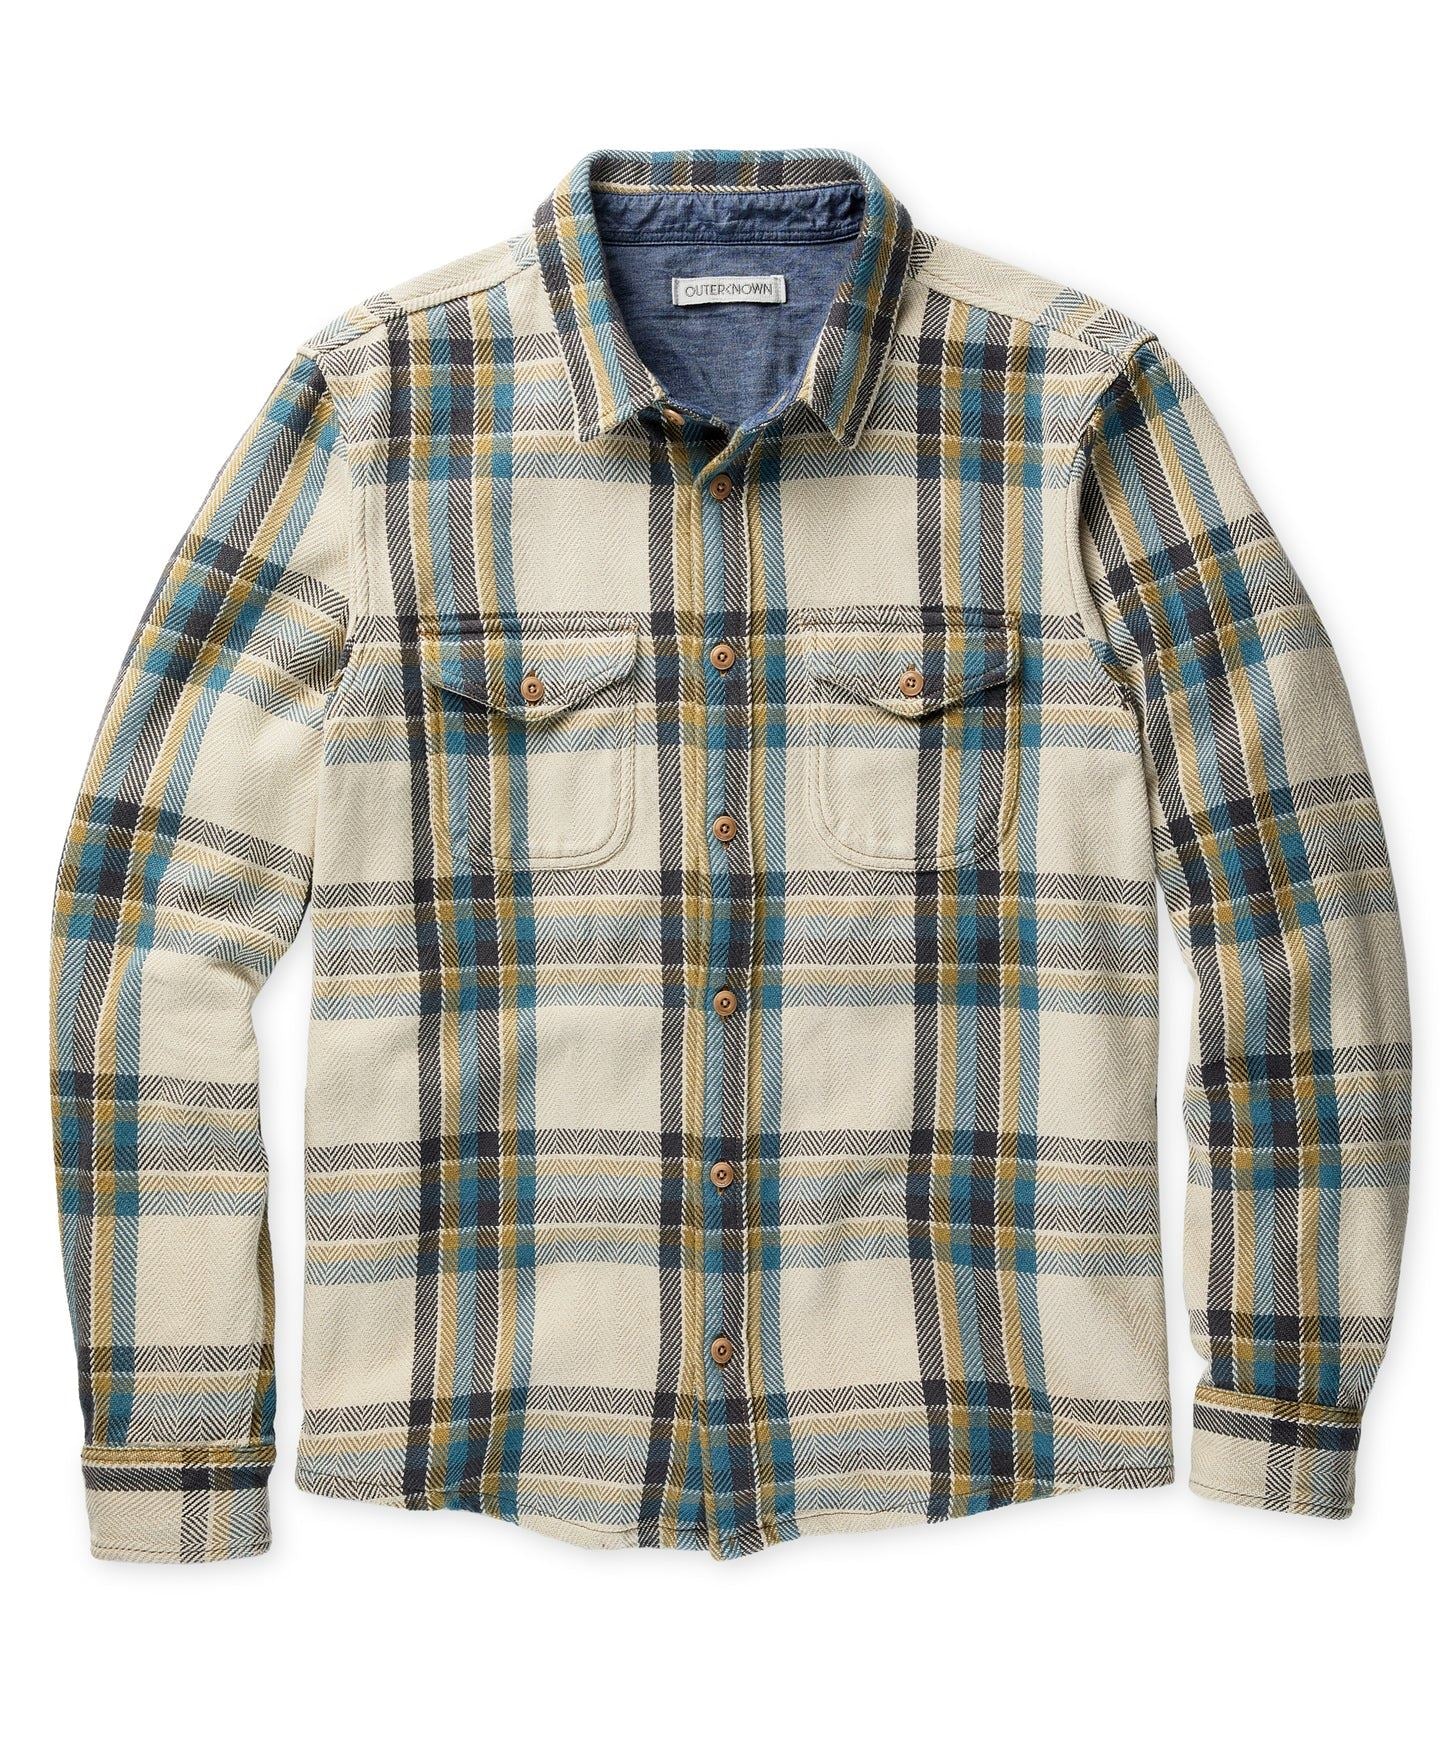 OuterKnown Blanket Shirt M Shirts OUTERKNOWN MENS 